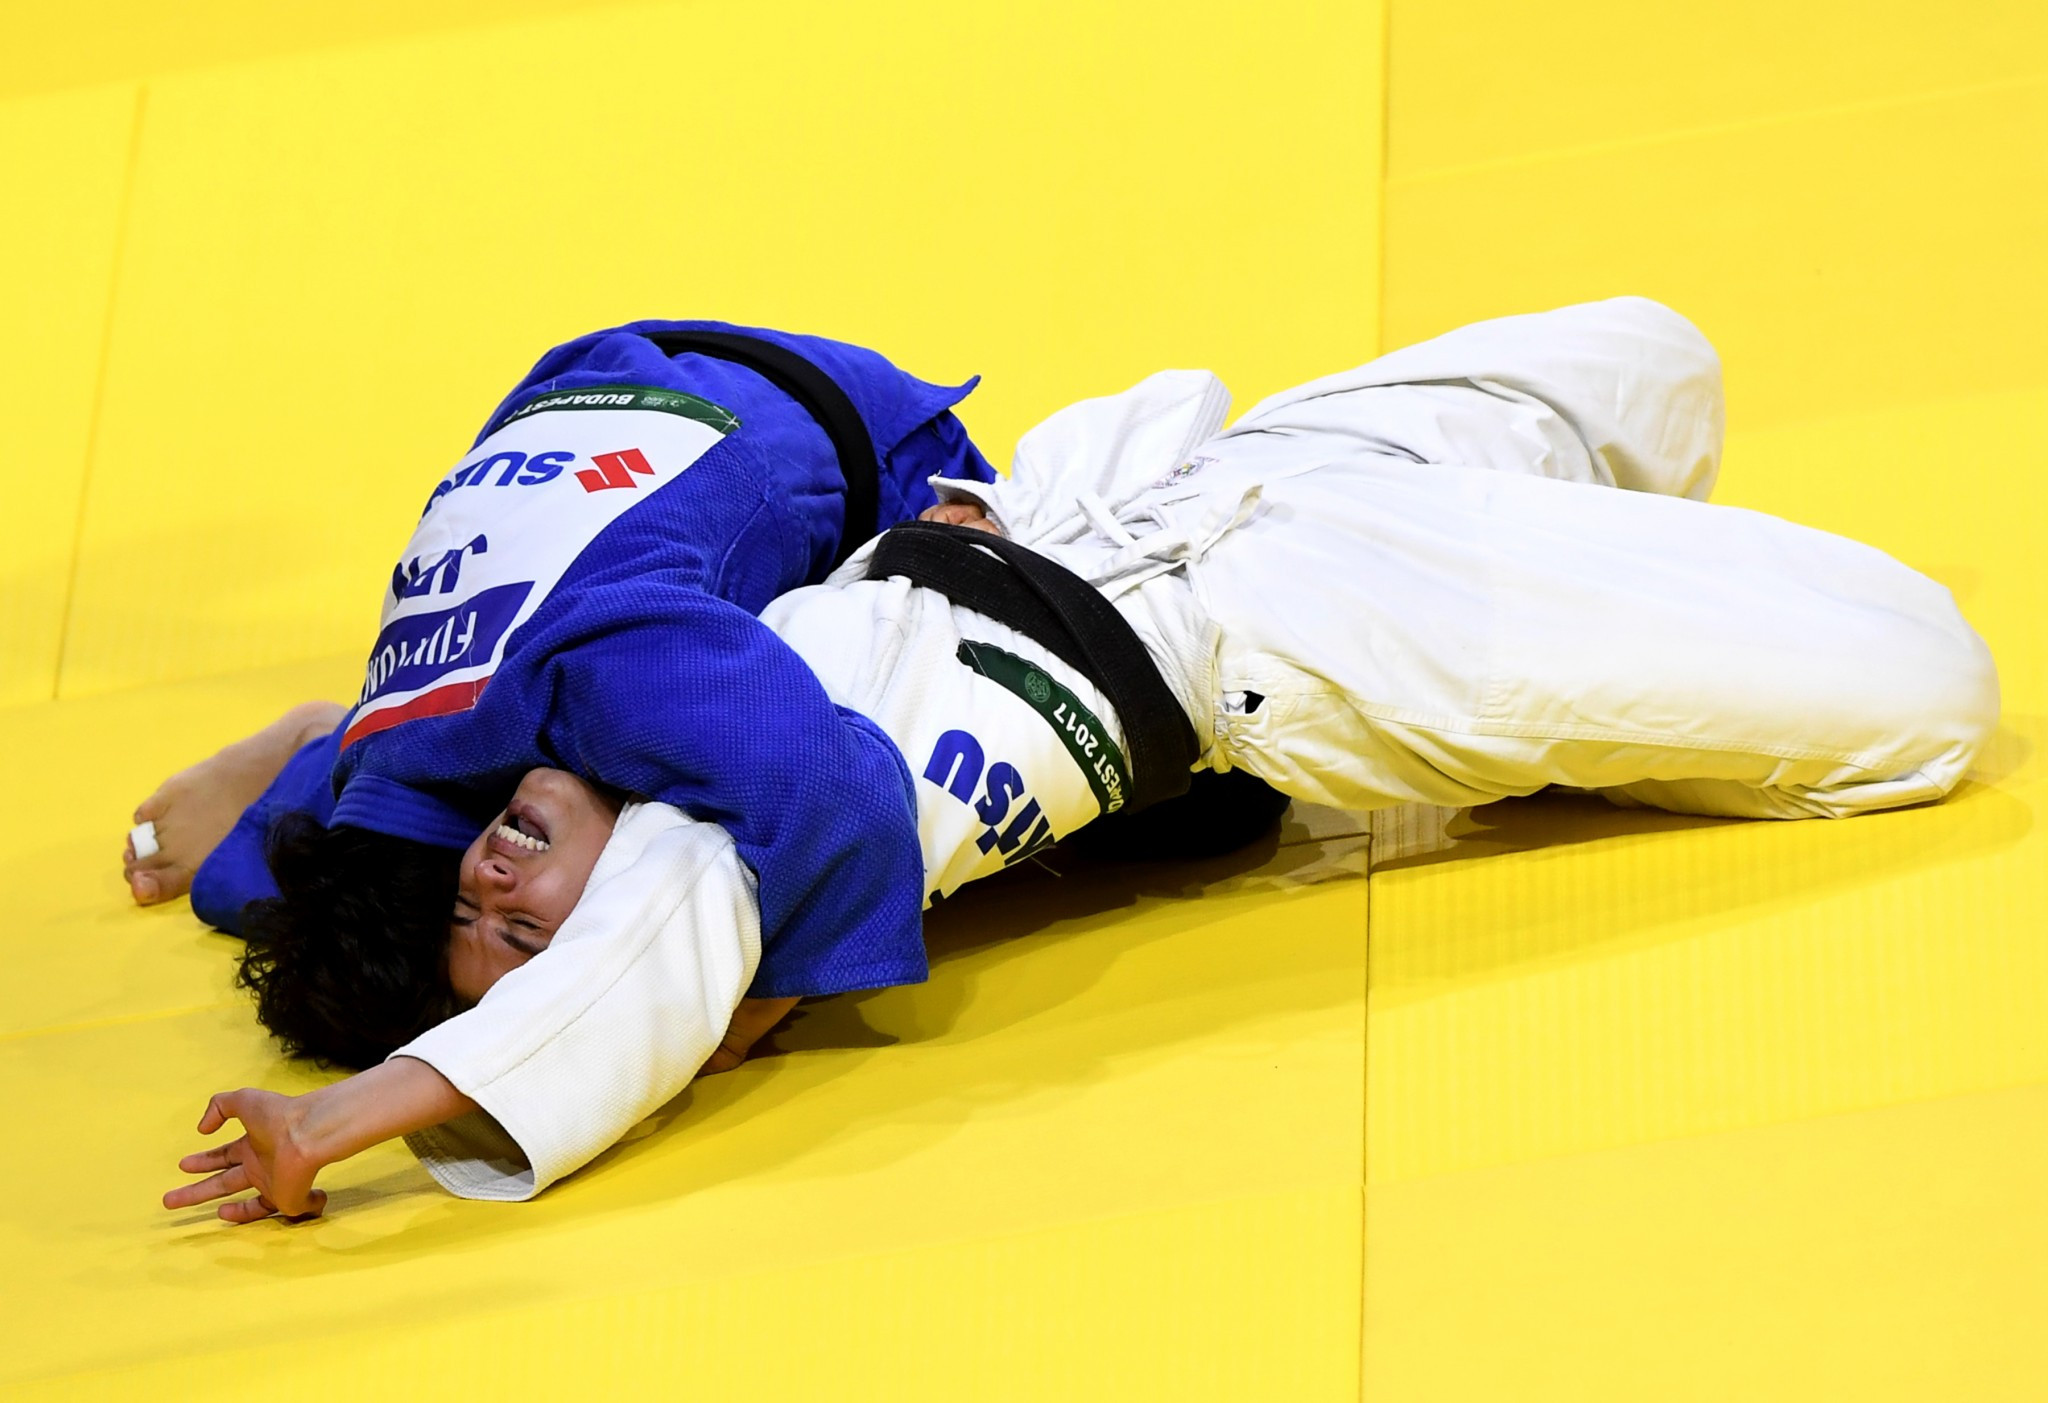 Japan's debutant Funa Tonaki produced a superb performance to claim the under 46kg gold medal ©Getty Images